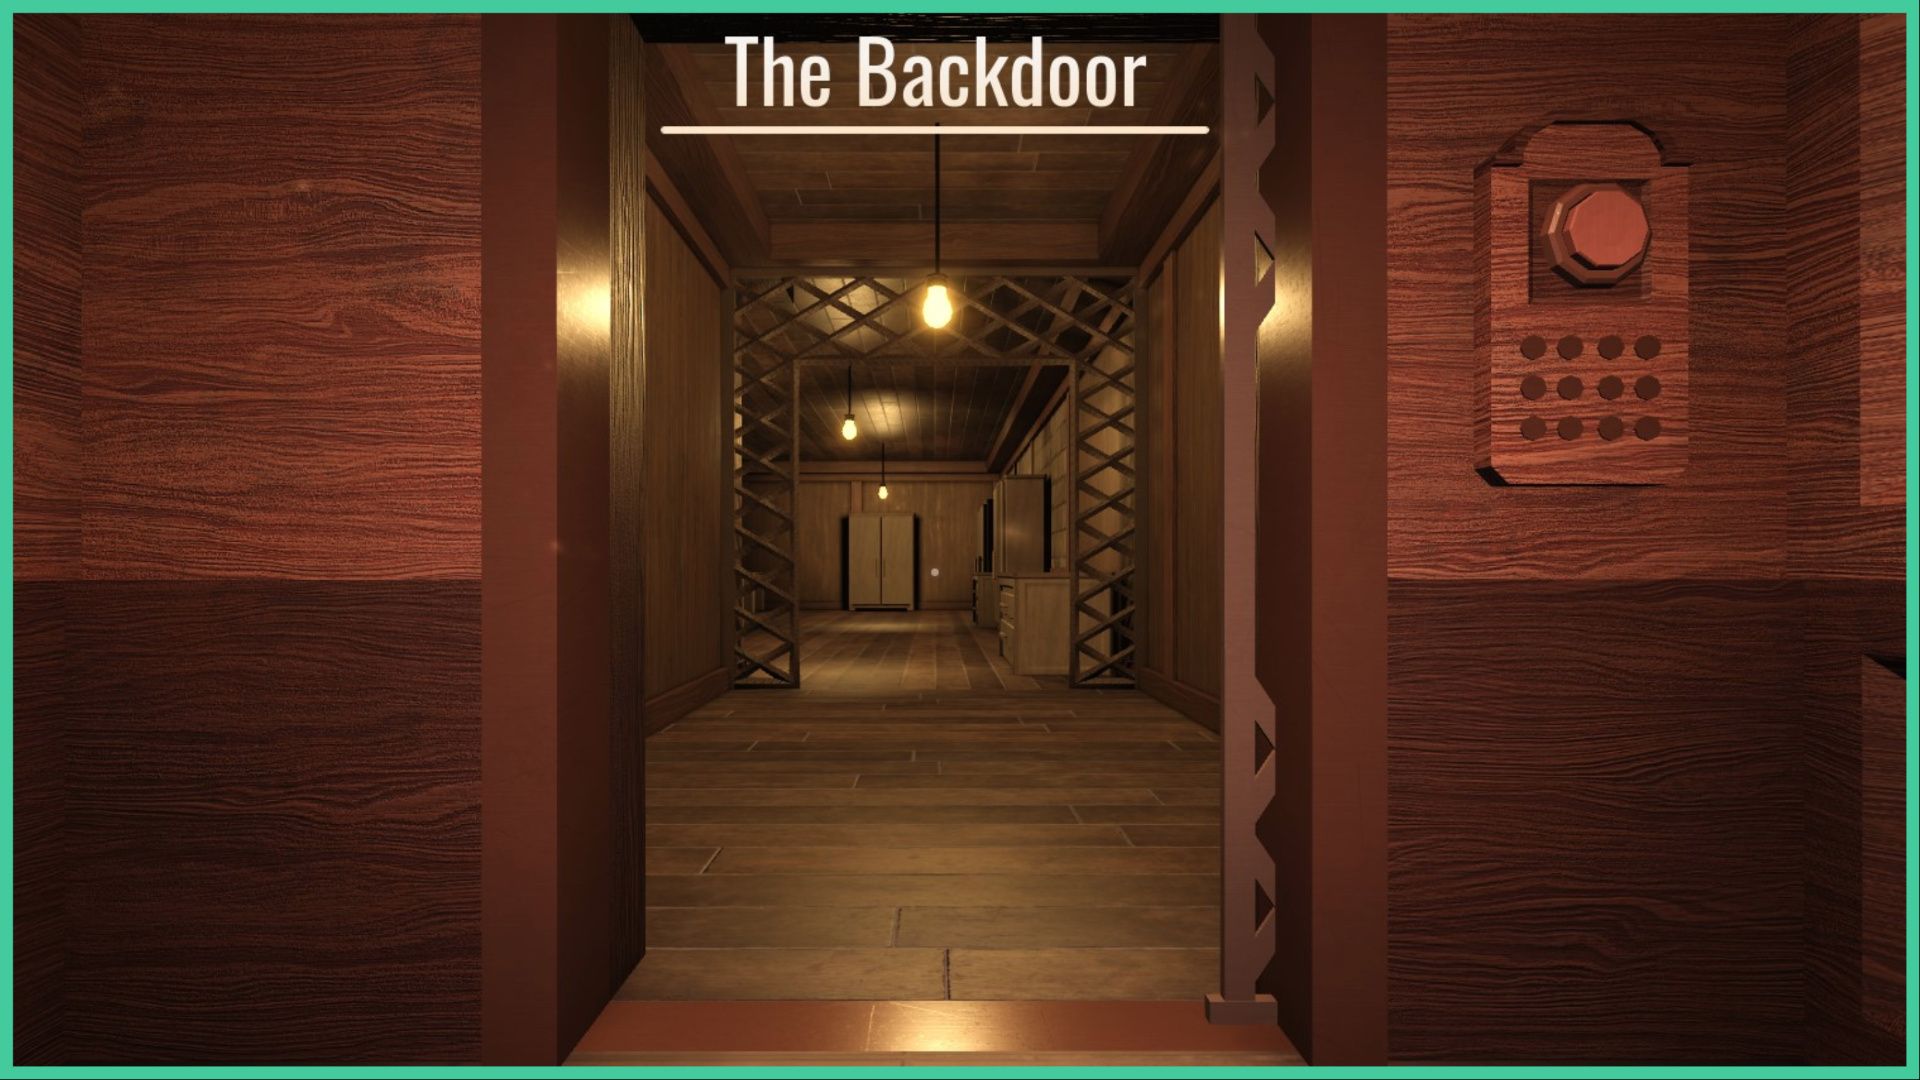 feature image for our doors the hunt guide, the image features a screenshot from the start of the level, from the perspective of a roblox player standing inside a wooden elevator, with a corridor ahead of them, with lightbulbs glowing from the ceiling, multiple closets, and a set of drawers, the level name 'the backdoor' is written at the top of the screen as you load into the level